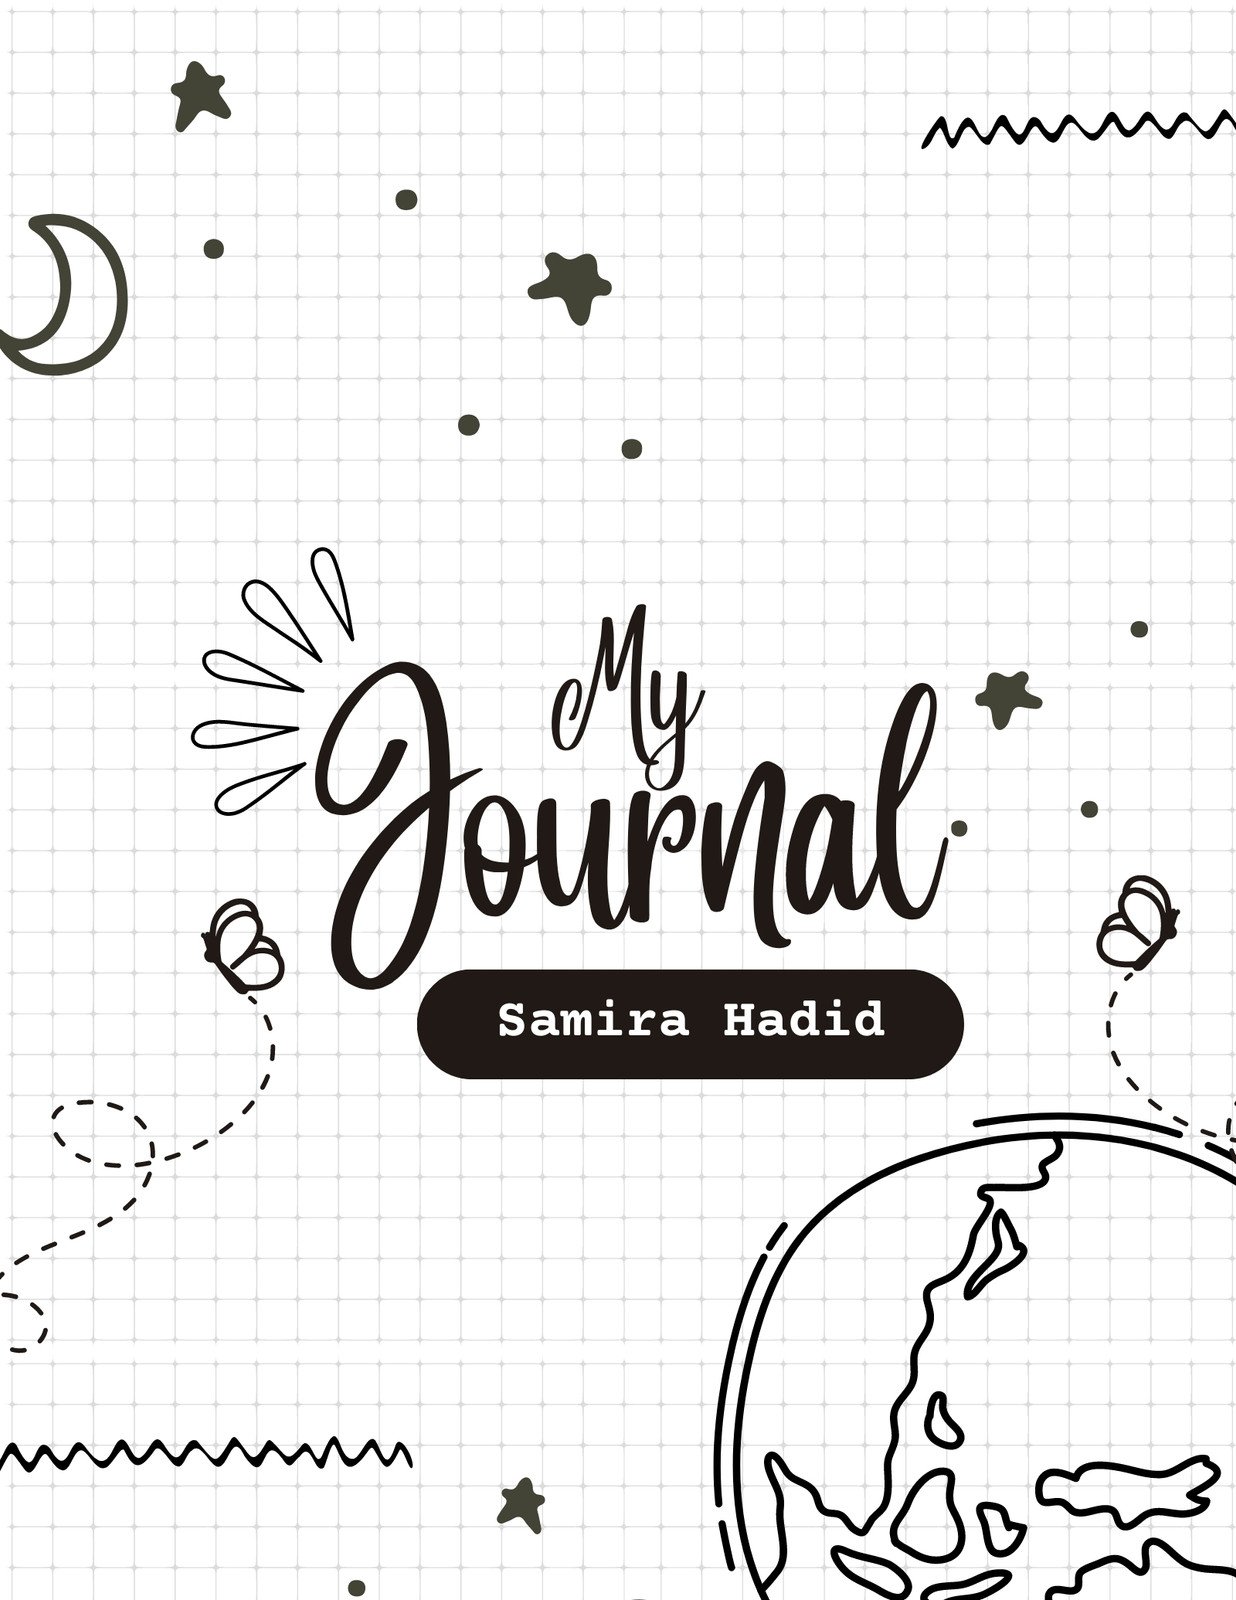 Coloring Journals with Modern Designs - School Datebooks